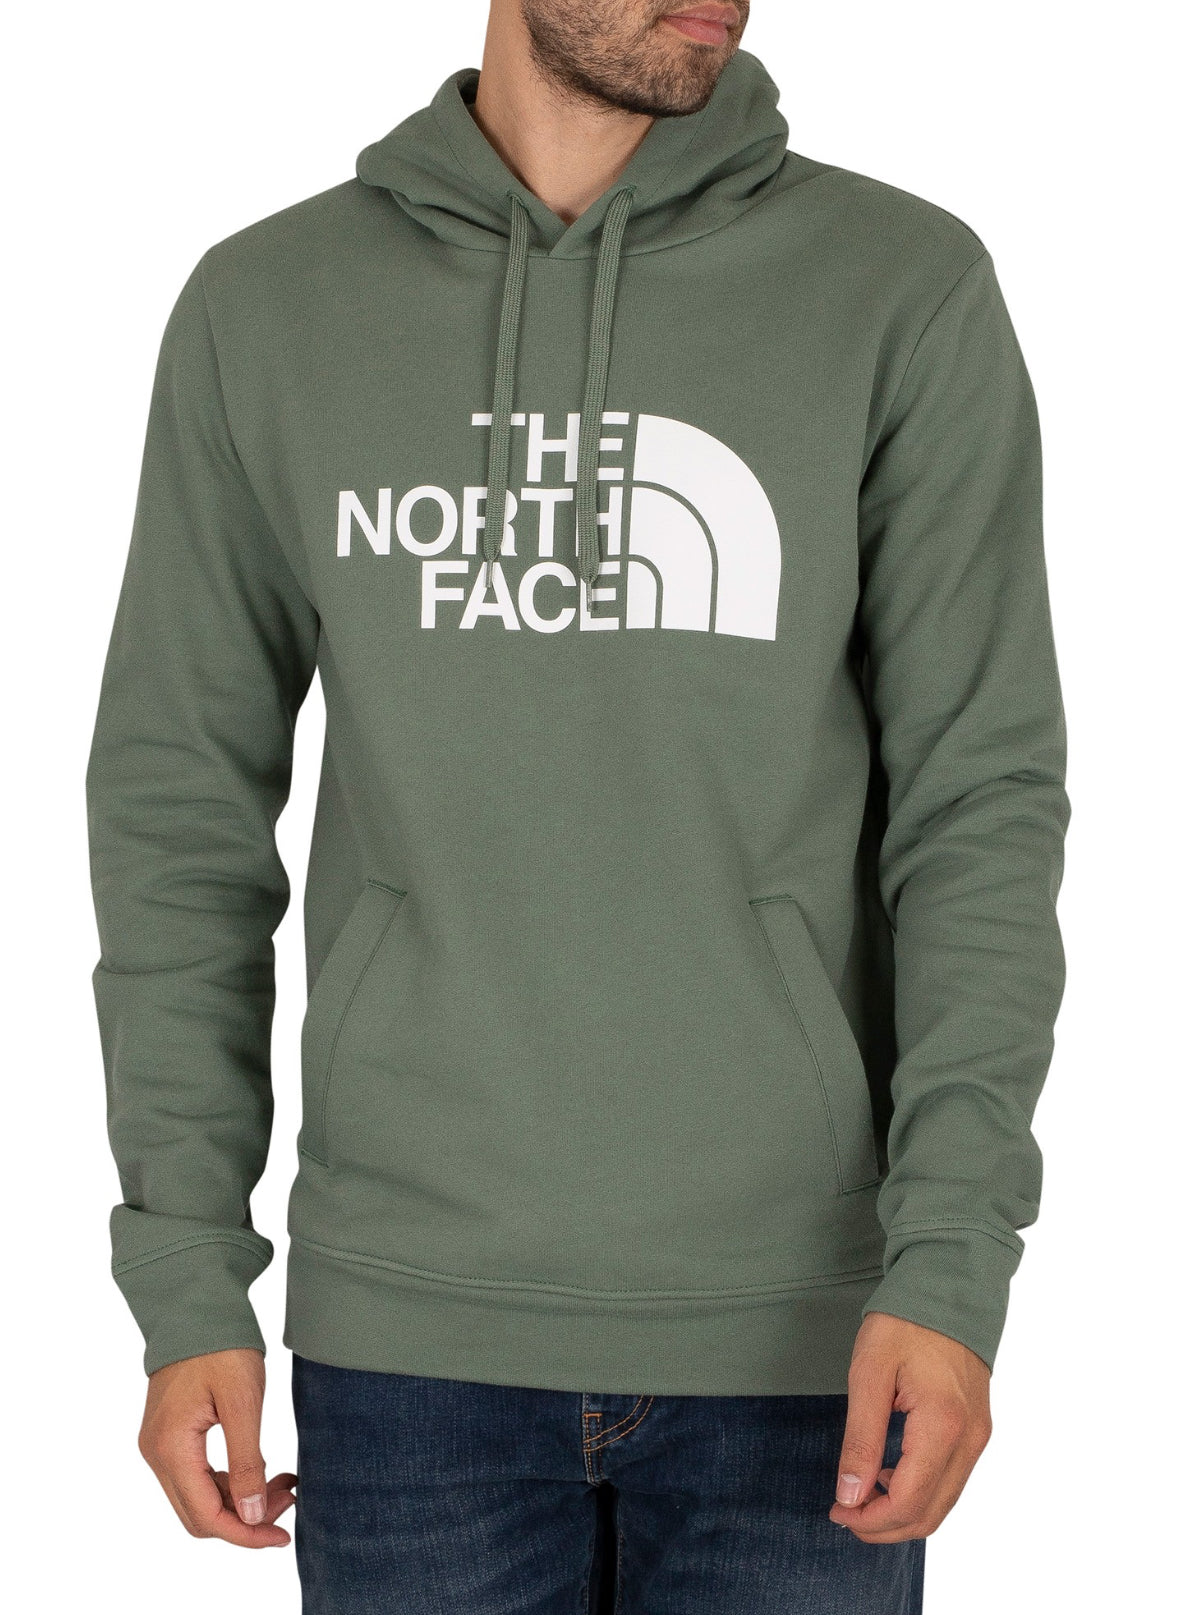 THE NORTH FACE HALF DOME PULLOVER HOODIE LAUREL WREATH GREEN